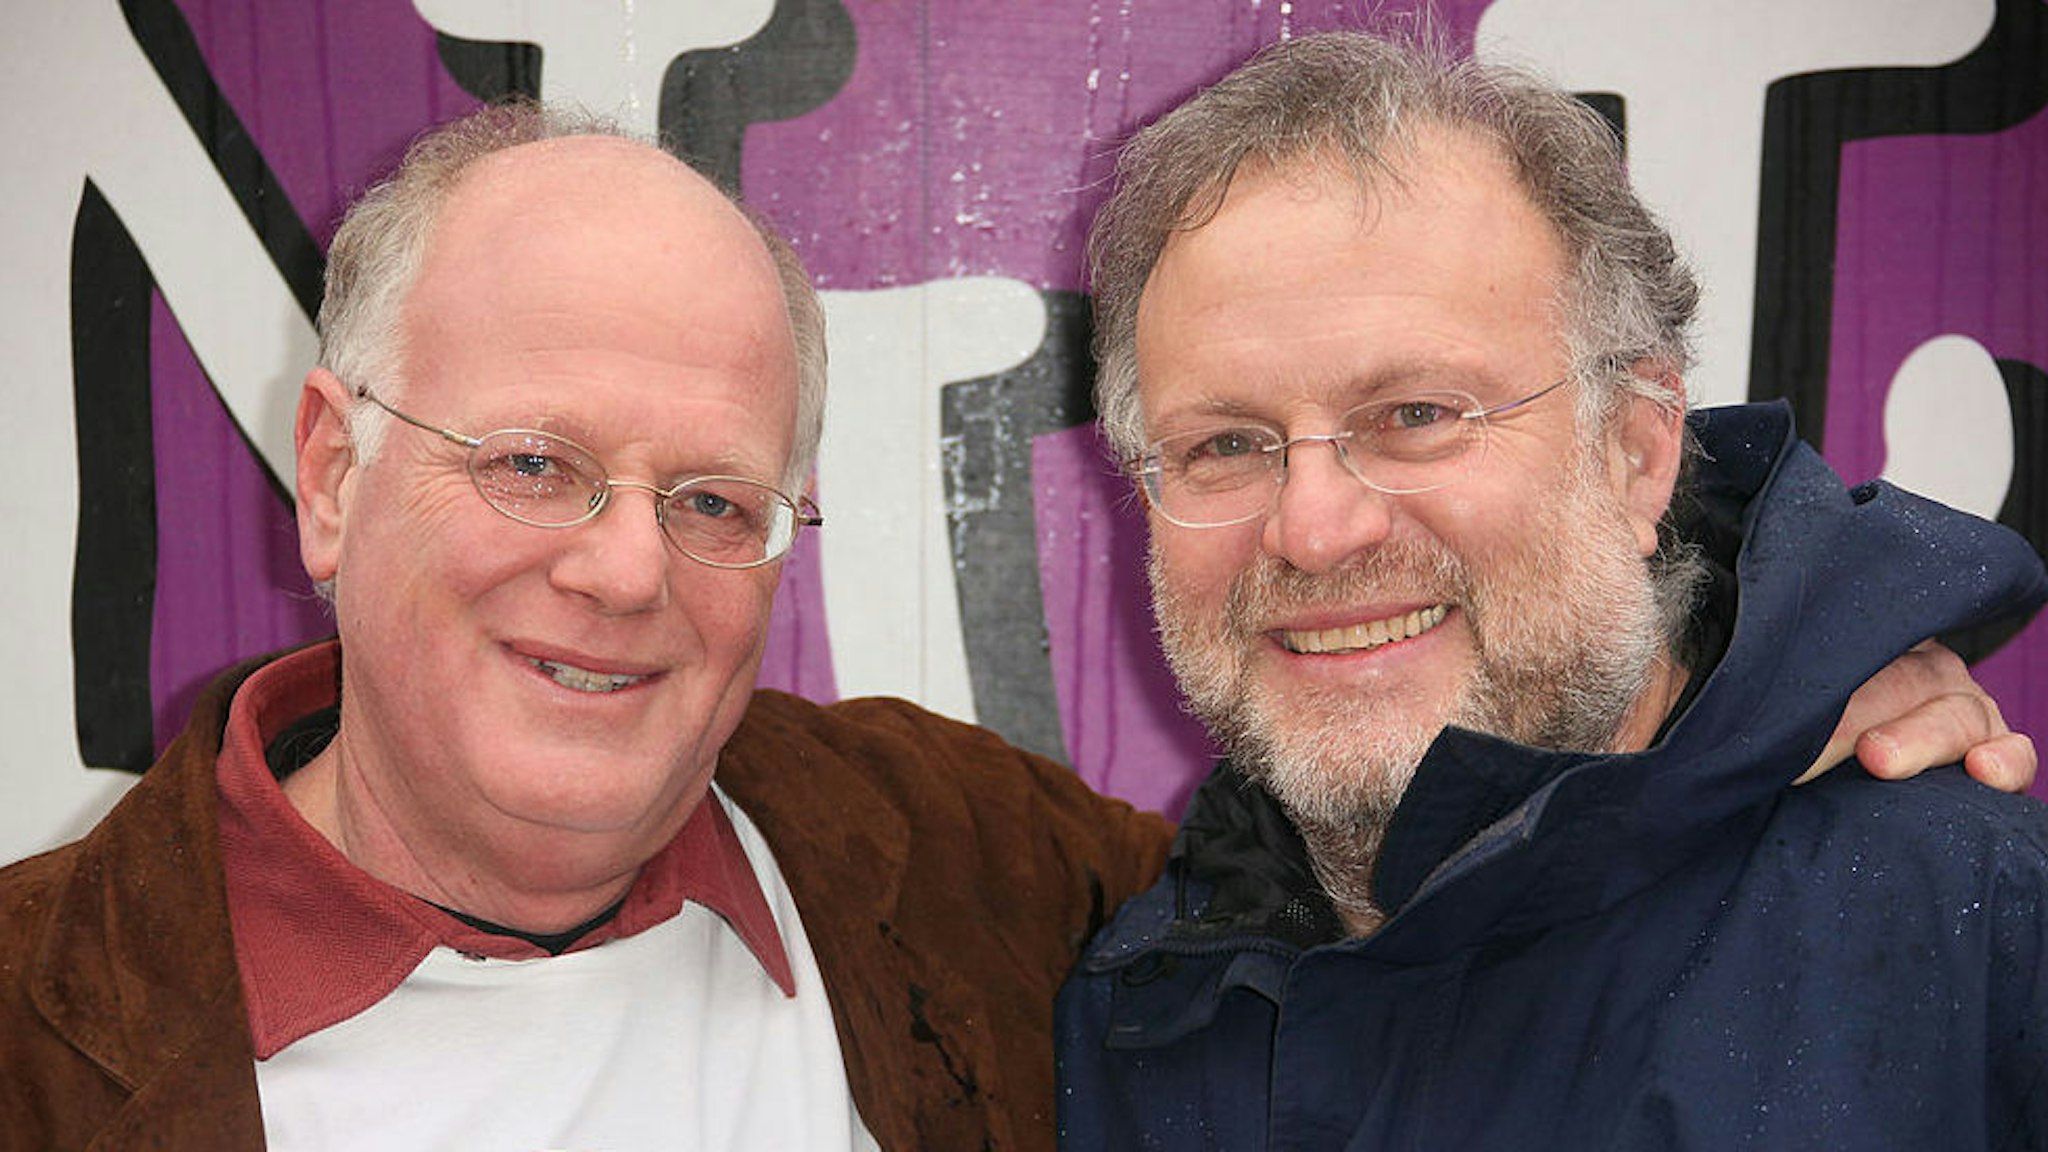 Ben Cohen and Jerry Greenfield at the global announcement of Ben & Jerry's ice cream going 100% Fairtrade on February 18, 2010 in London, England.